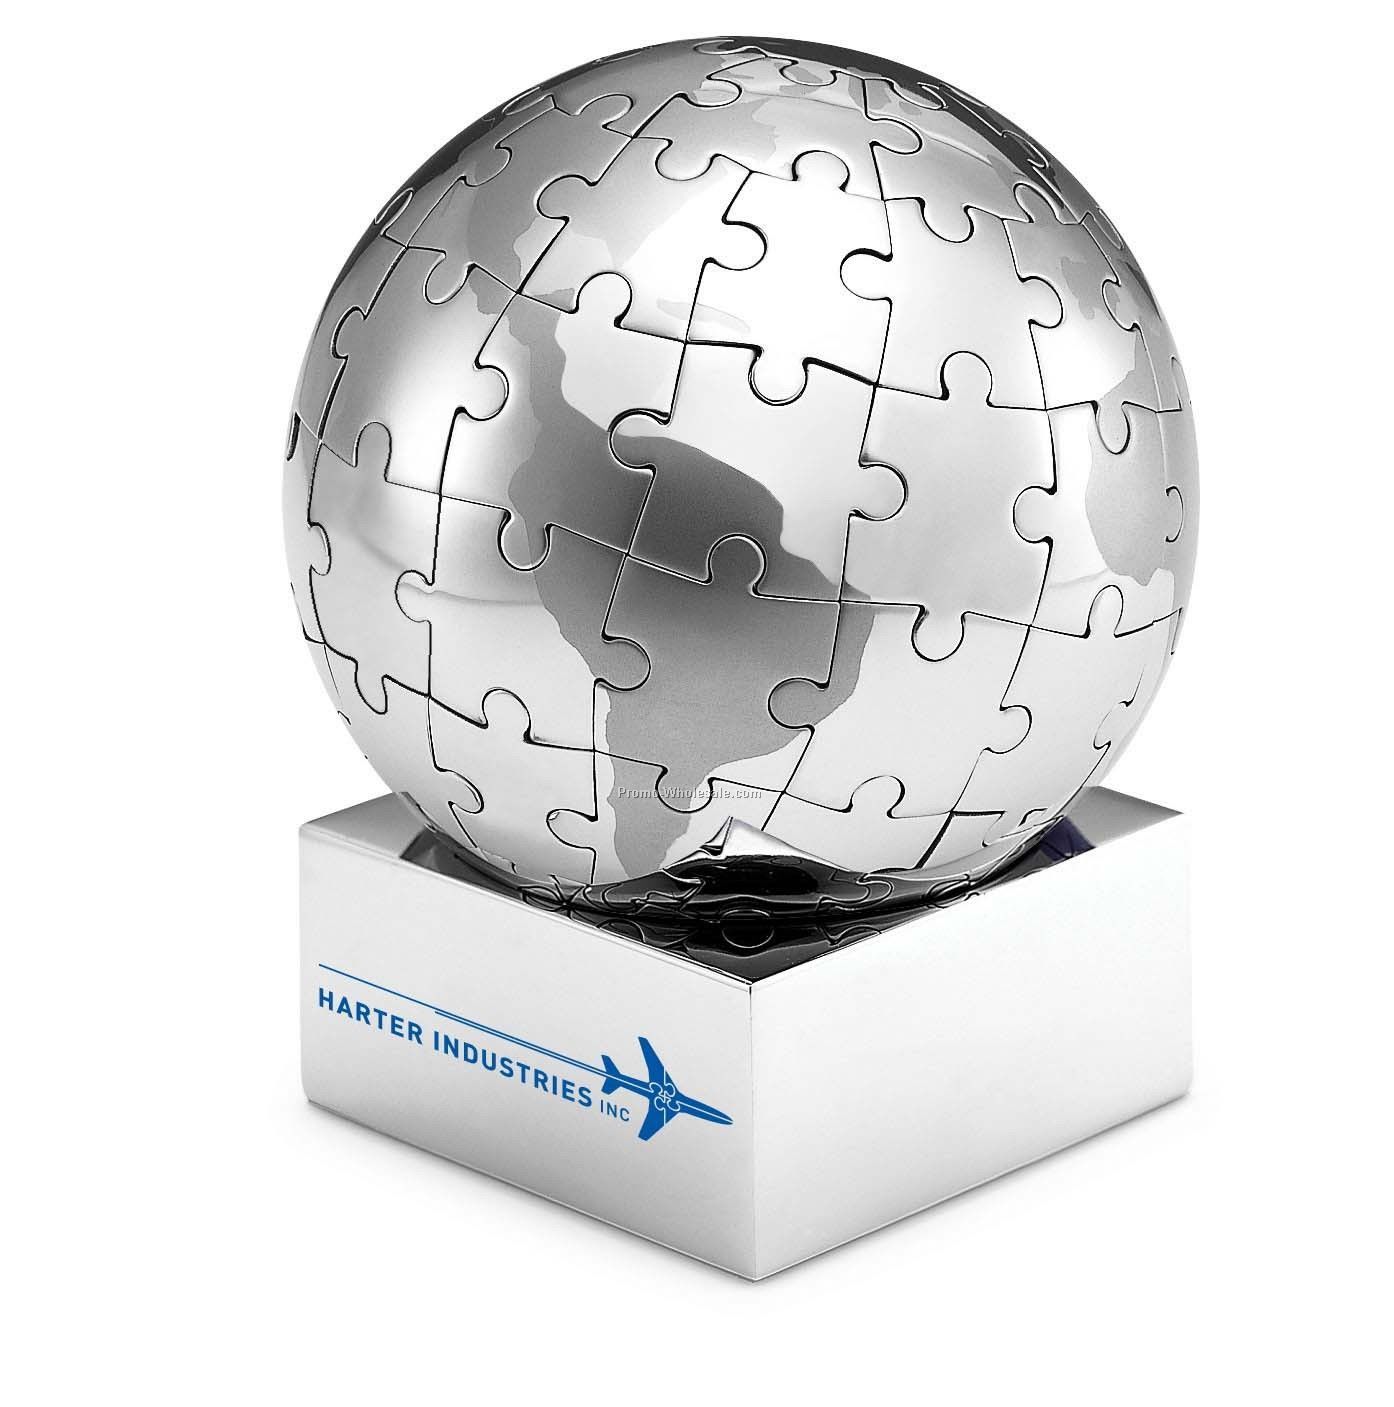 Stainless Steel Magnetic Globe Puzzle